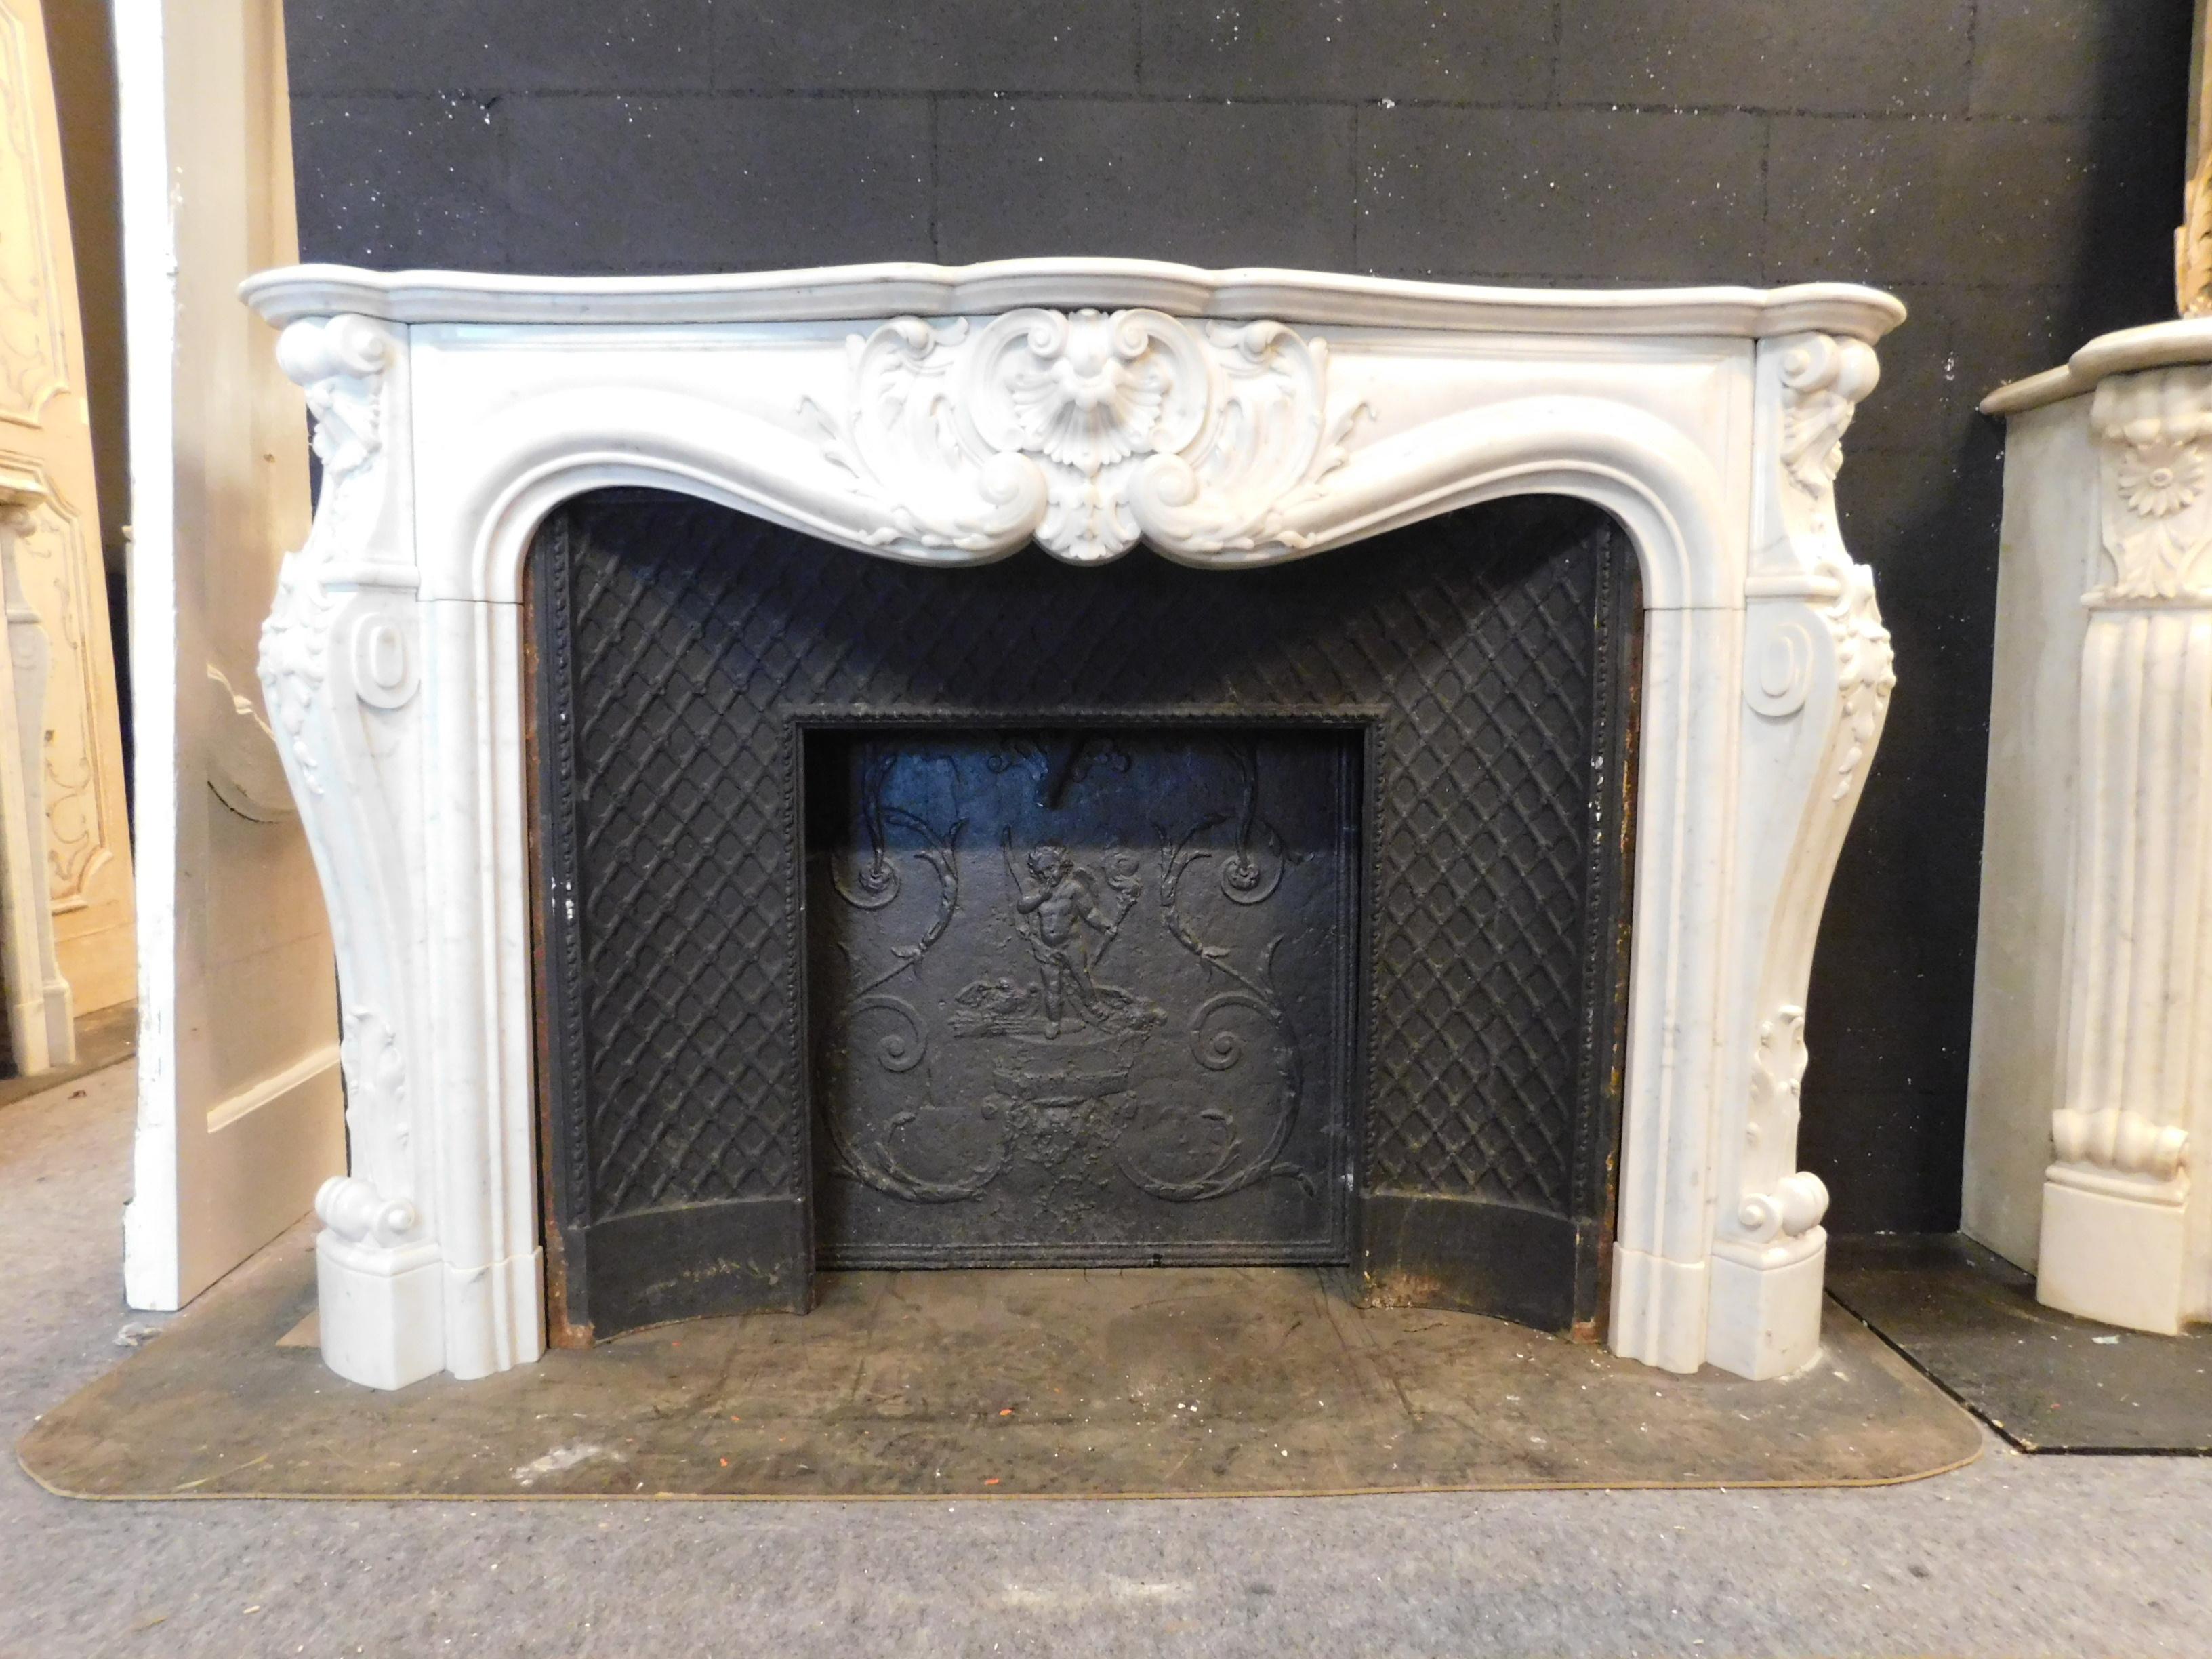 French Antique Louis XV Fireplace, Richly Carved White Marble, 1700 Paris 'France'